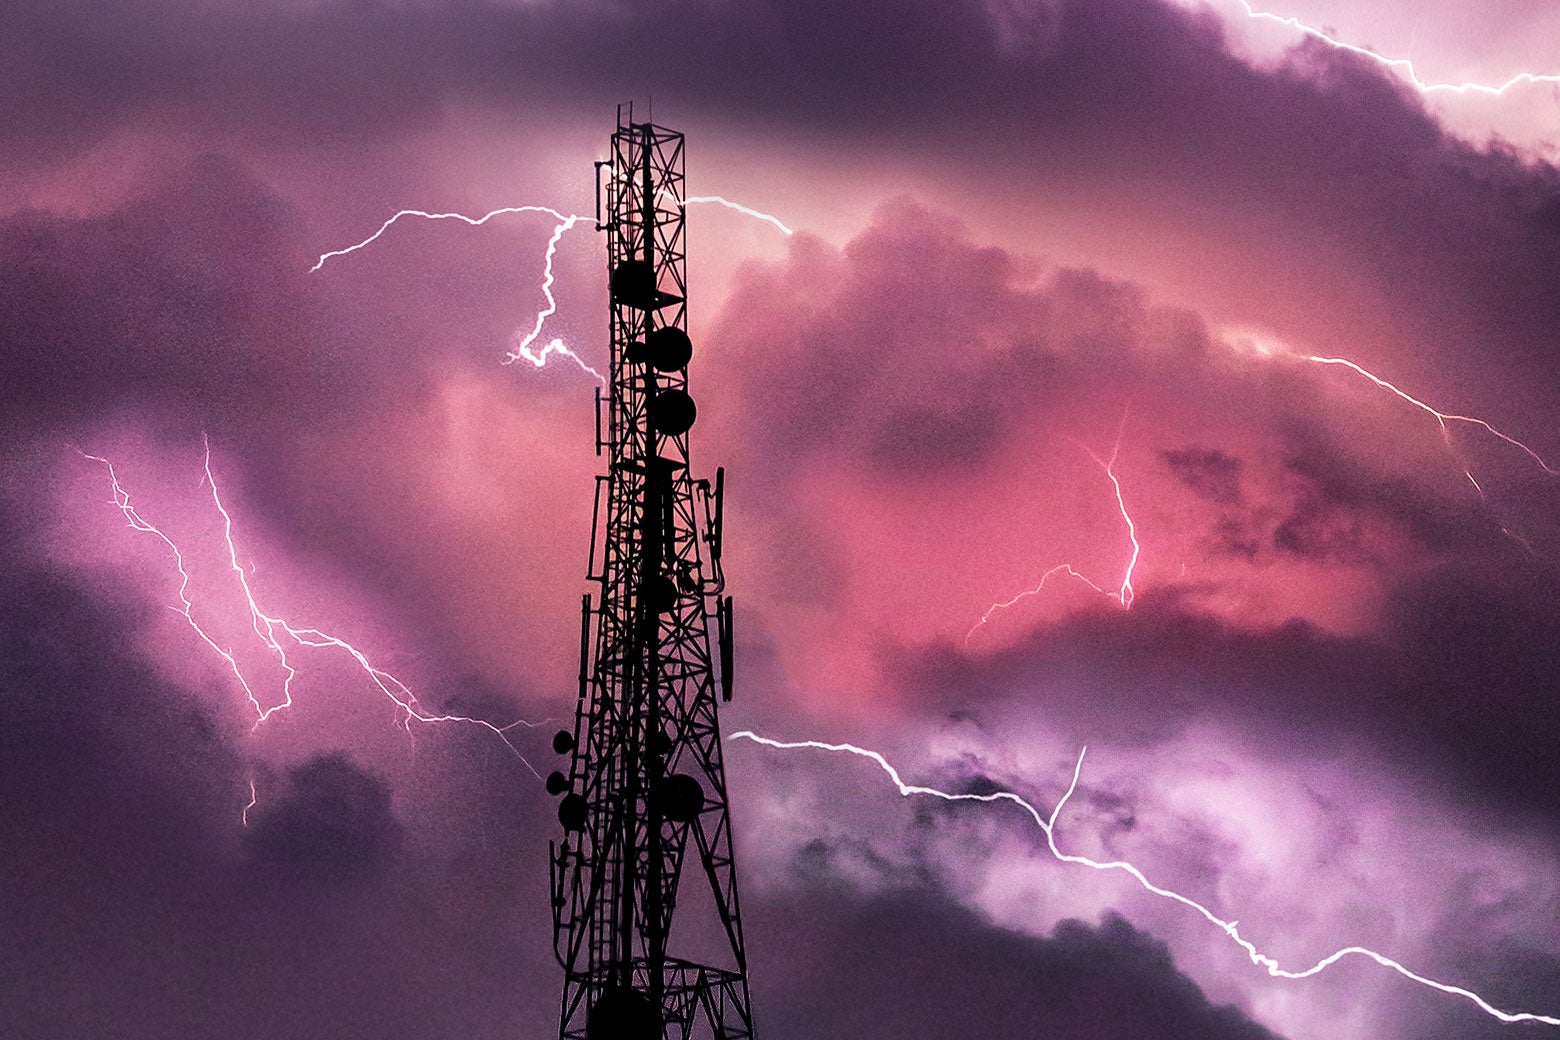 Lightning in a stormy sky, around a radio tower. 